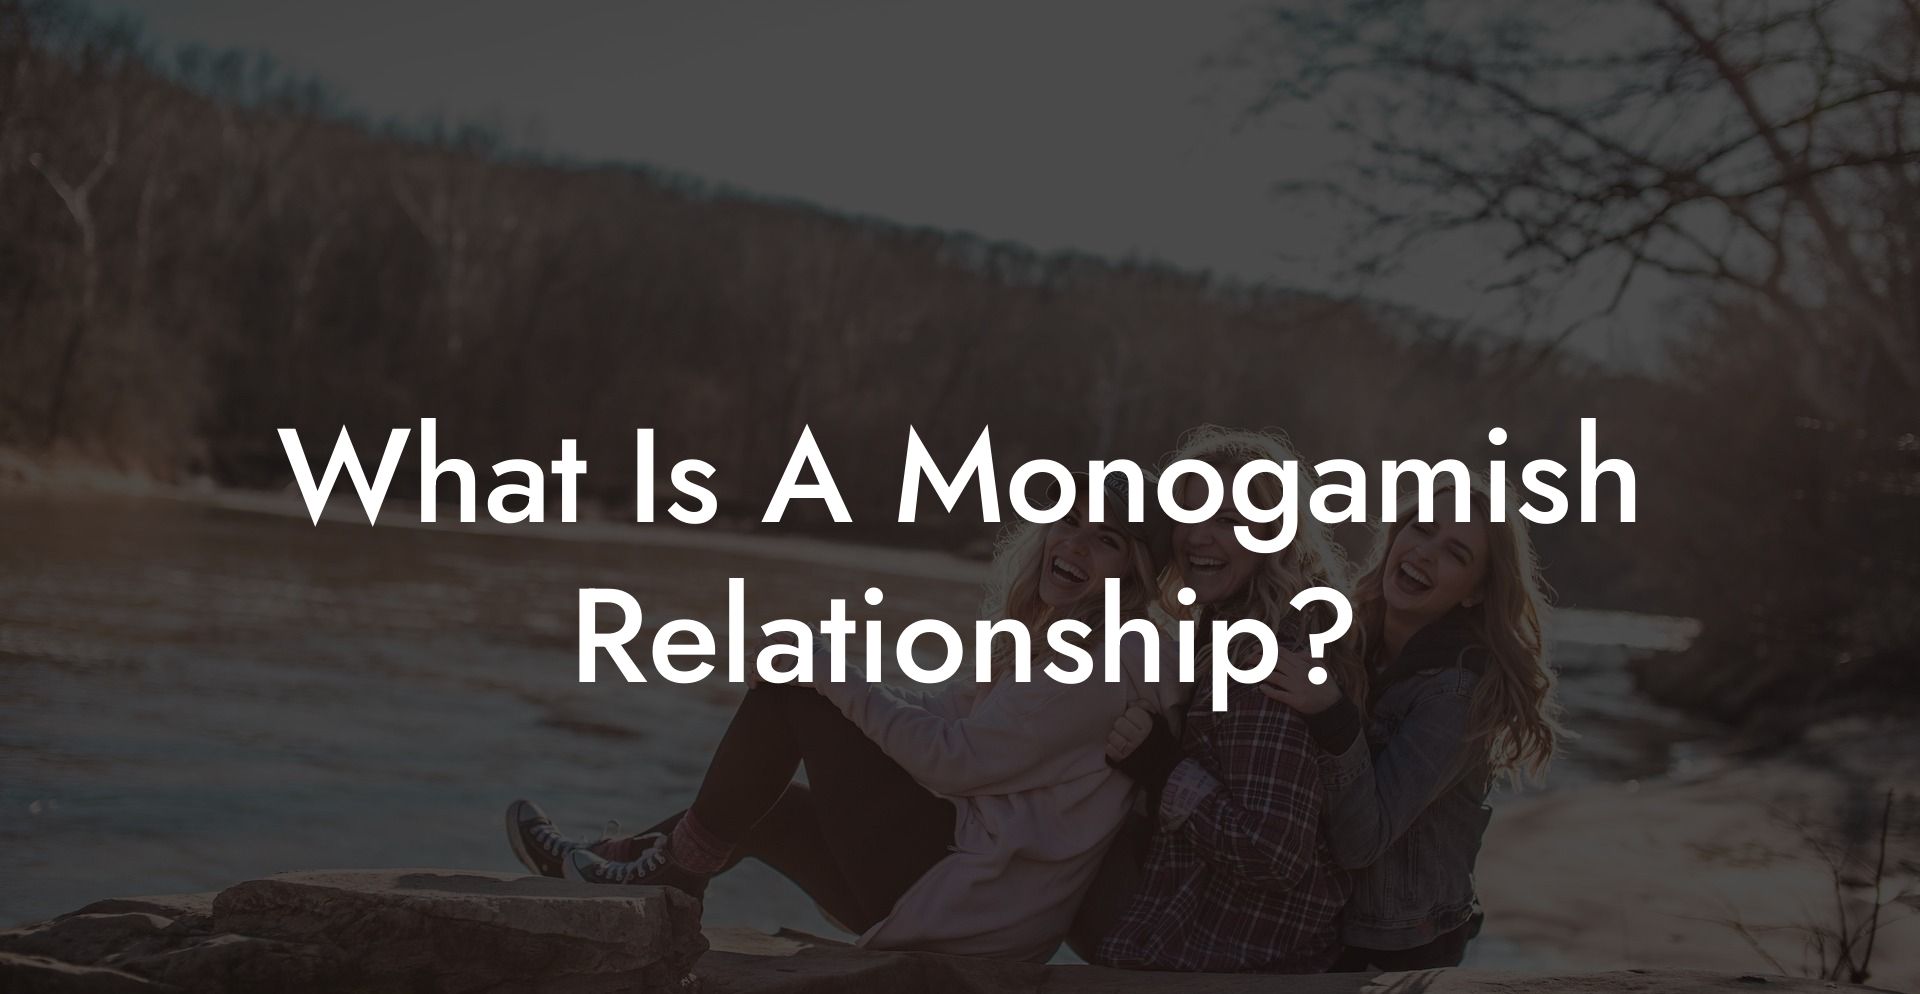 What Is A Monogamish Relationship?